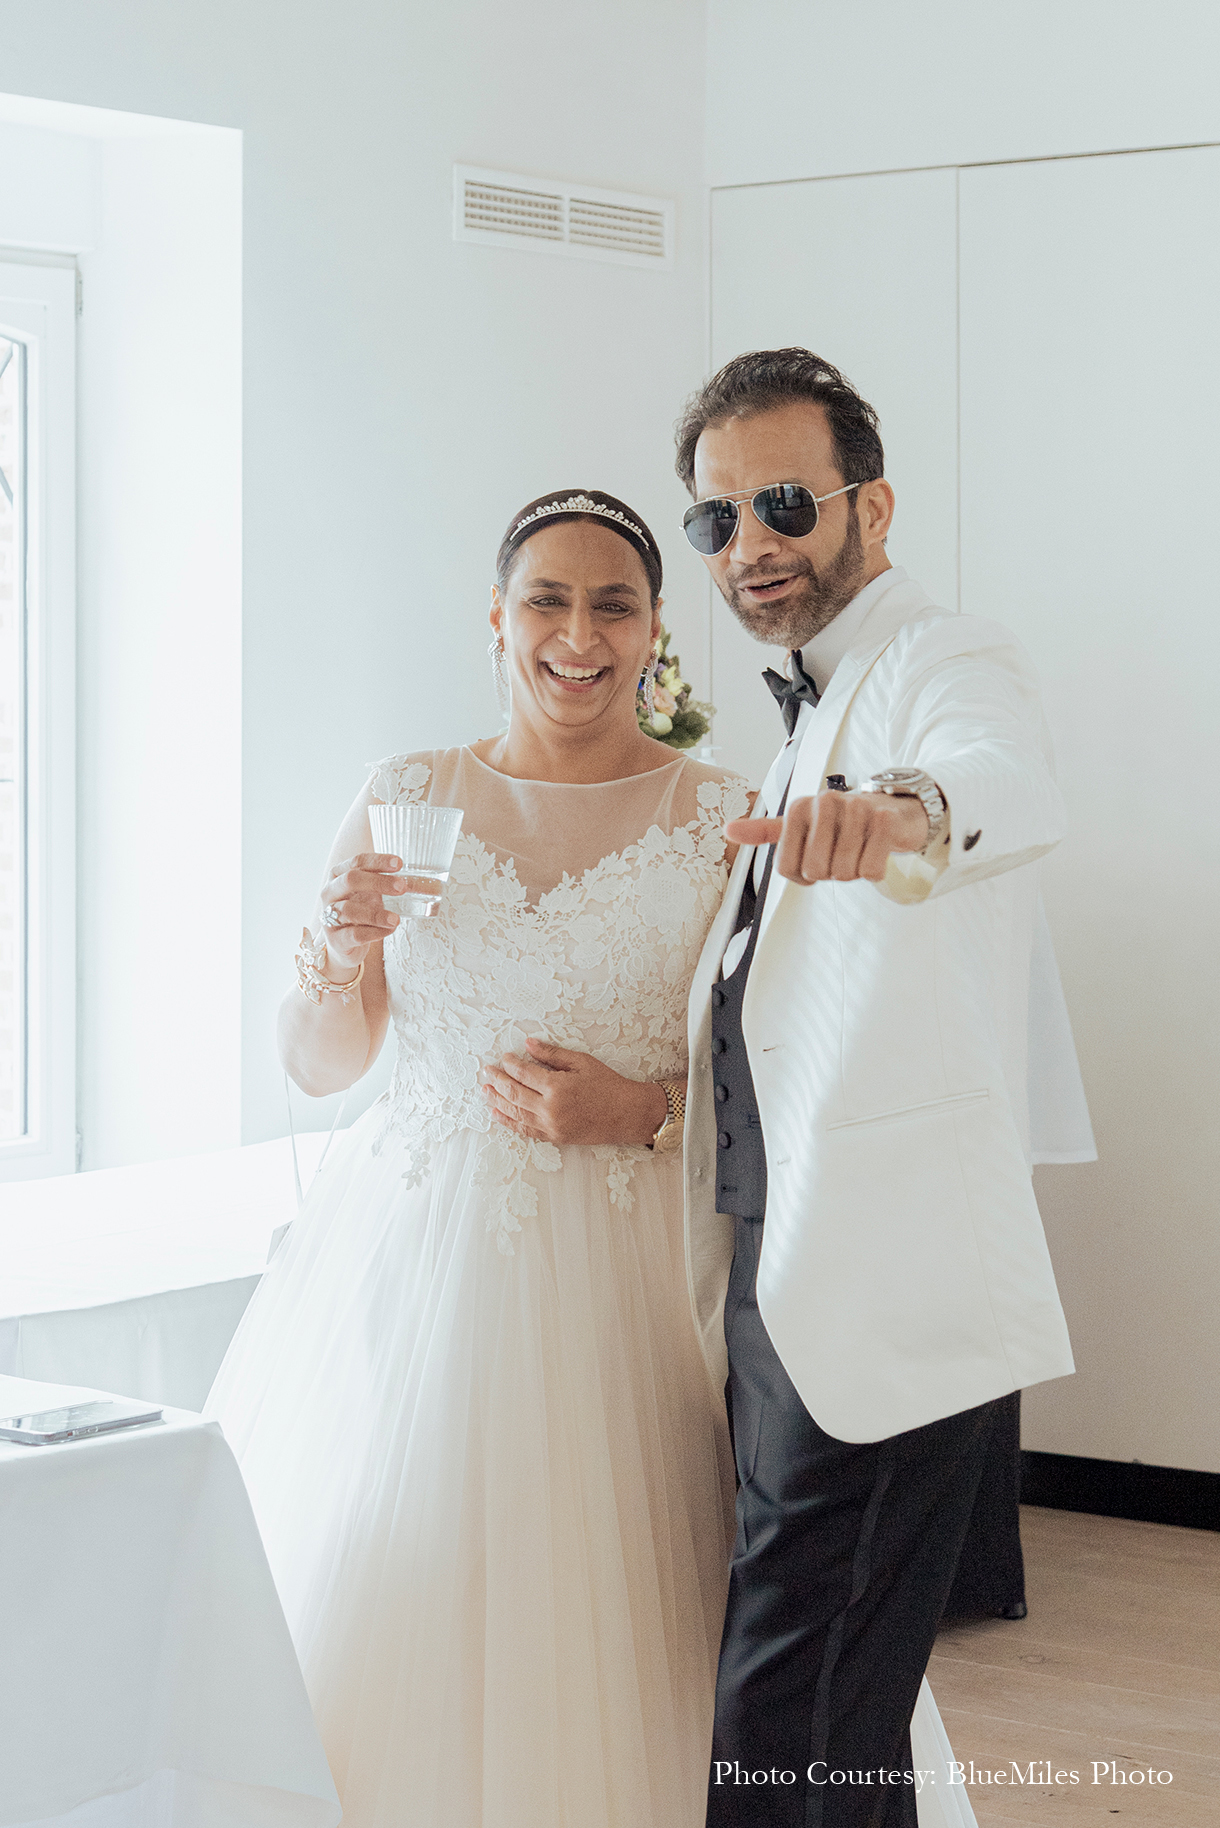 A whimsical white wedding in Belgium - Celebrating 25 years of love!